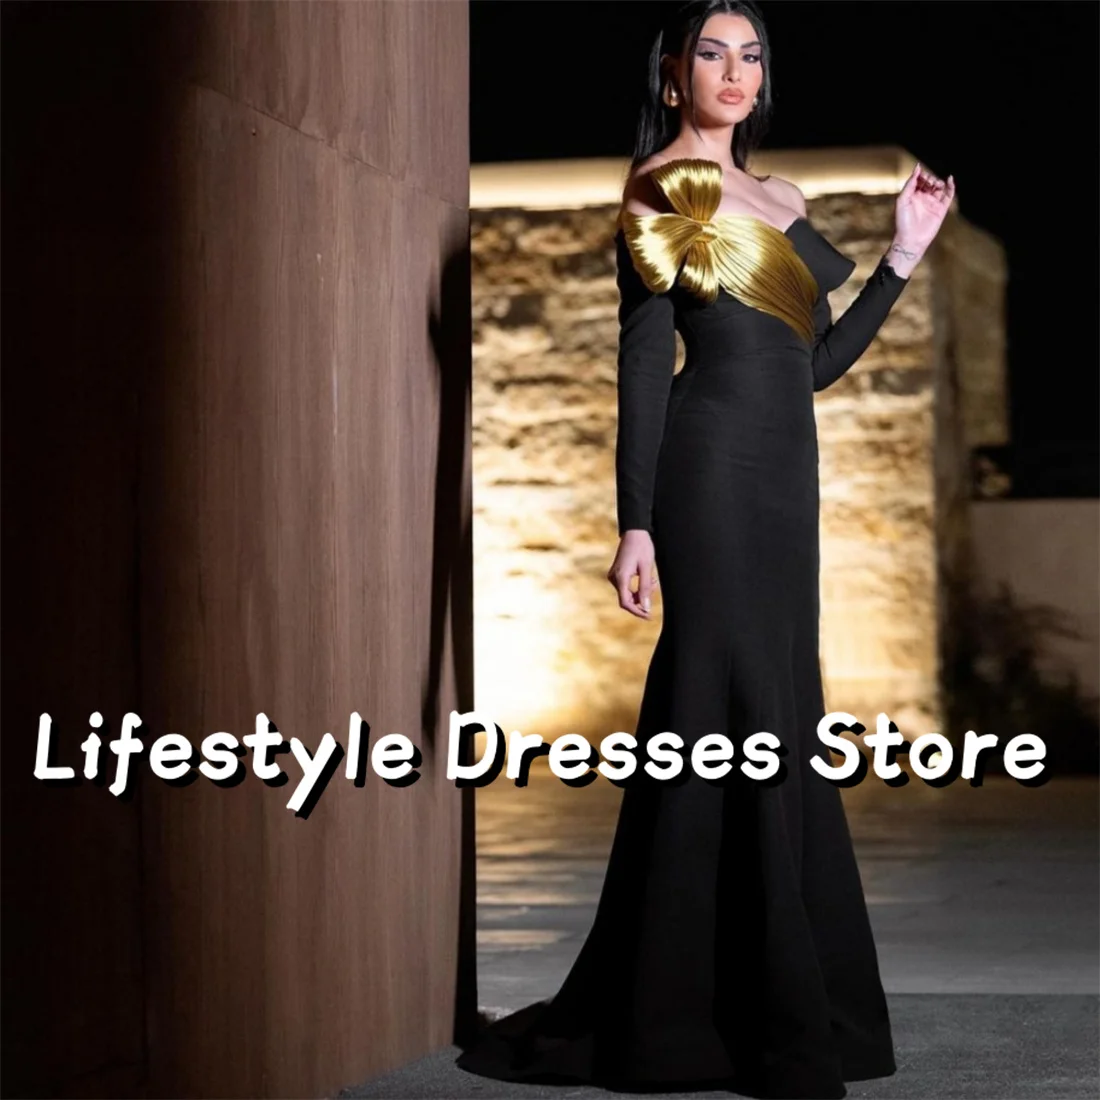 

Black Off Shoulder Prom Dresses With Gold Bow Mermaid Evening Gown Long Sleeve Party Dress vestidos para eventos especiales